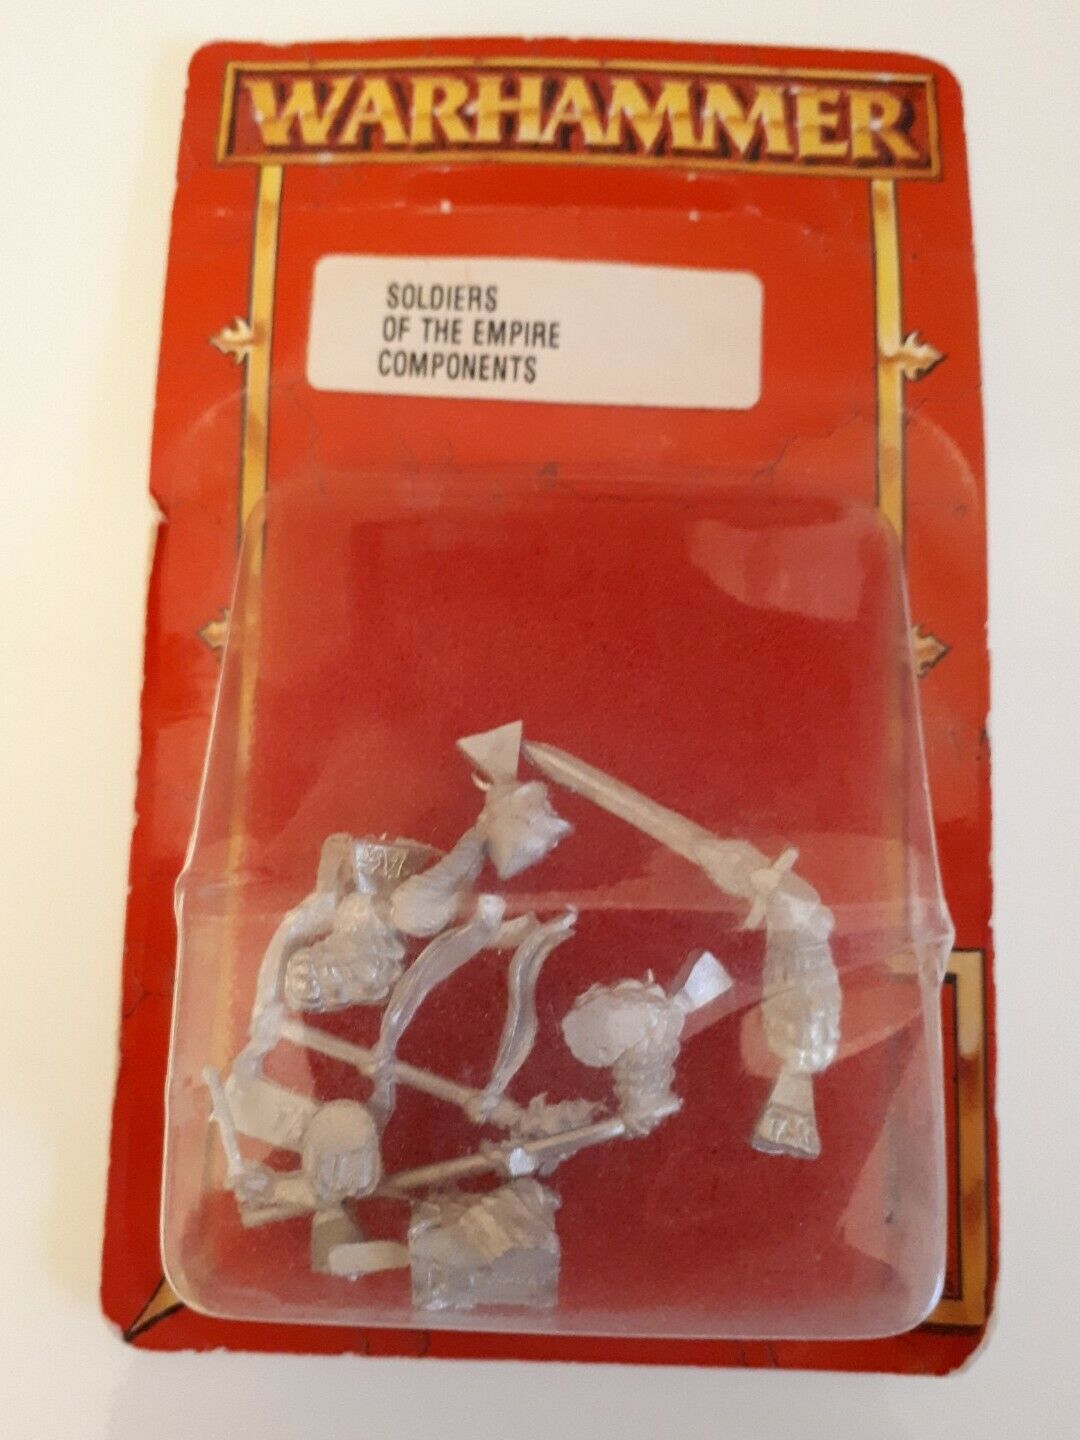 Warhammer Soldiers Of The Empire Components Sealed Blister 1997 Workshop Games 60％以上節約 内祝い